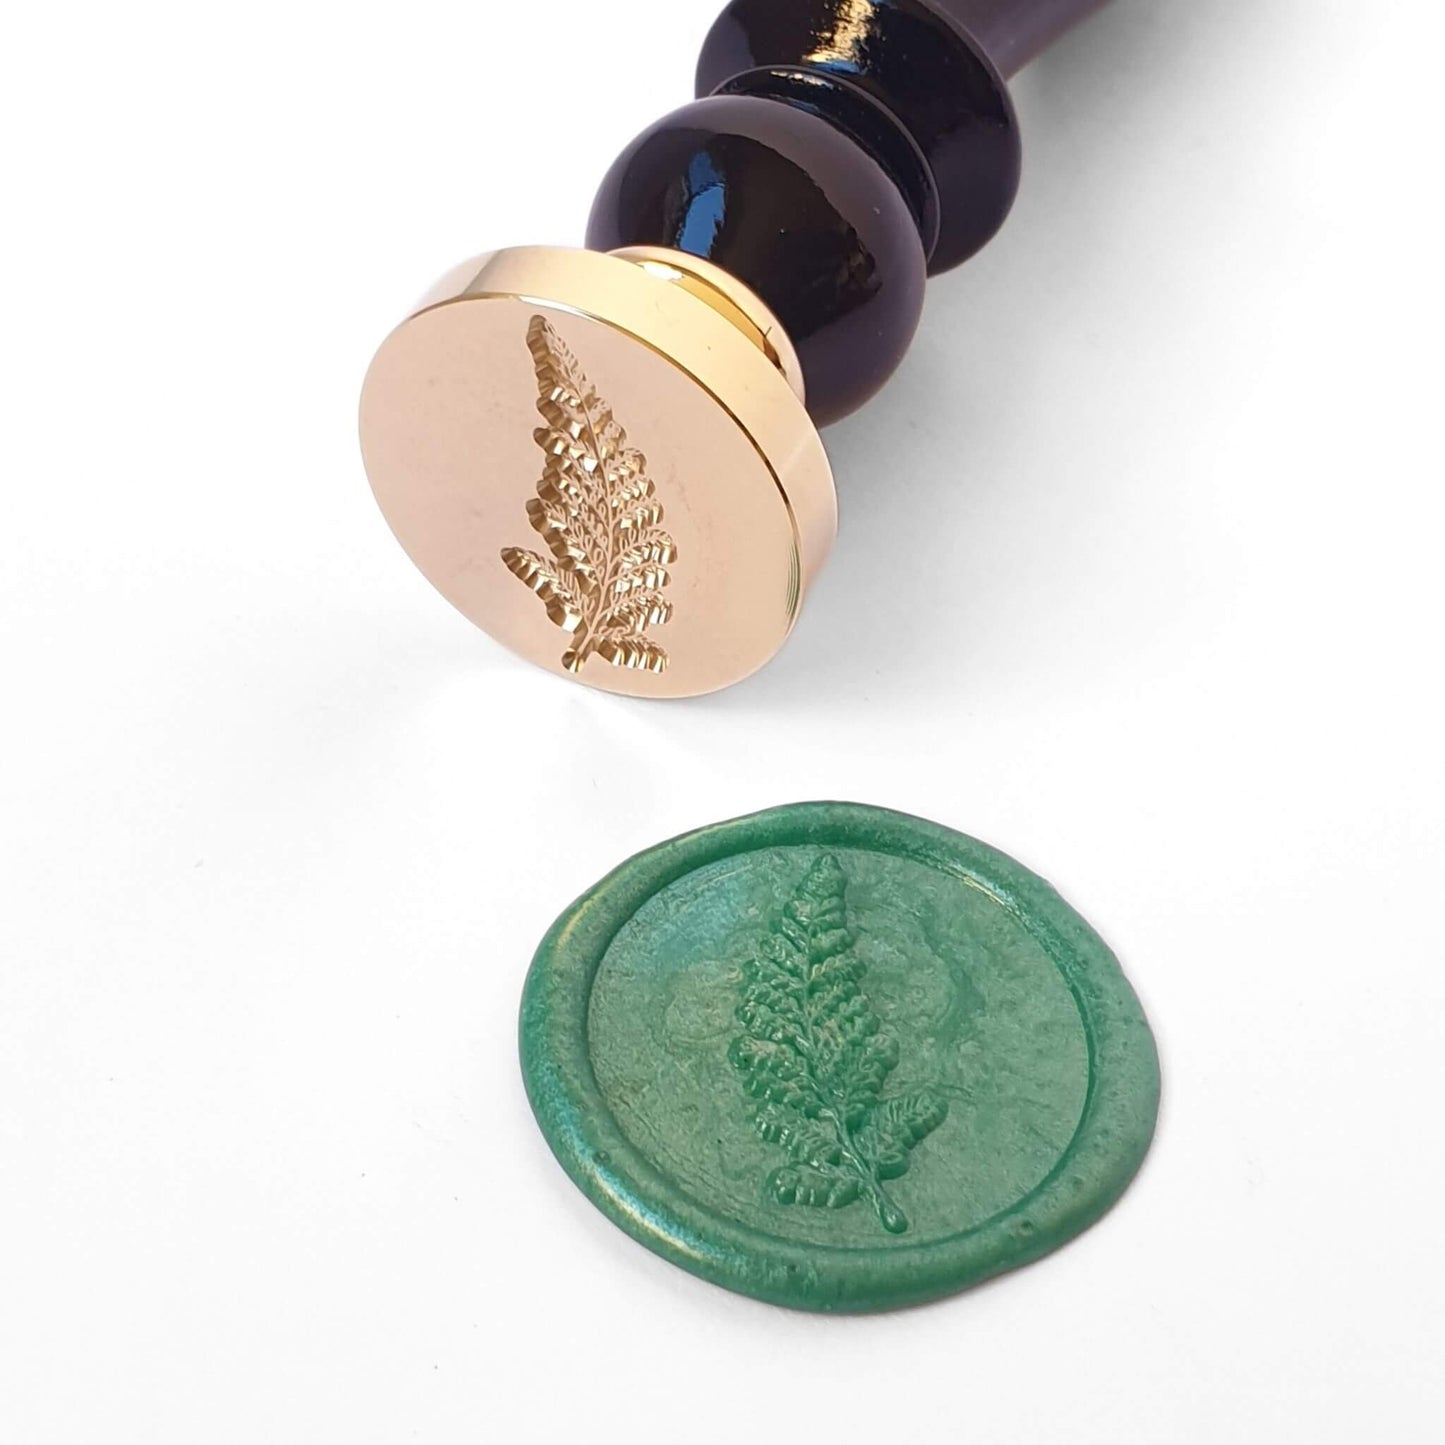 Brass wax seal with fern leaf engraving and black wooden handle